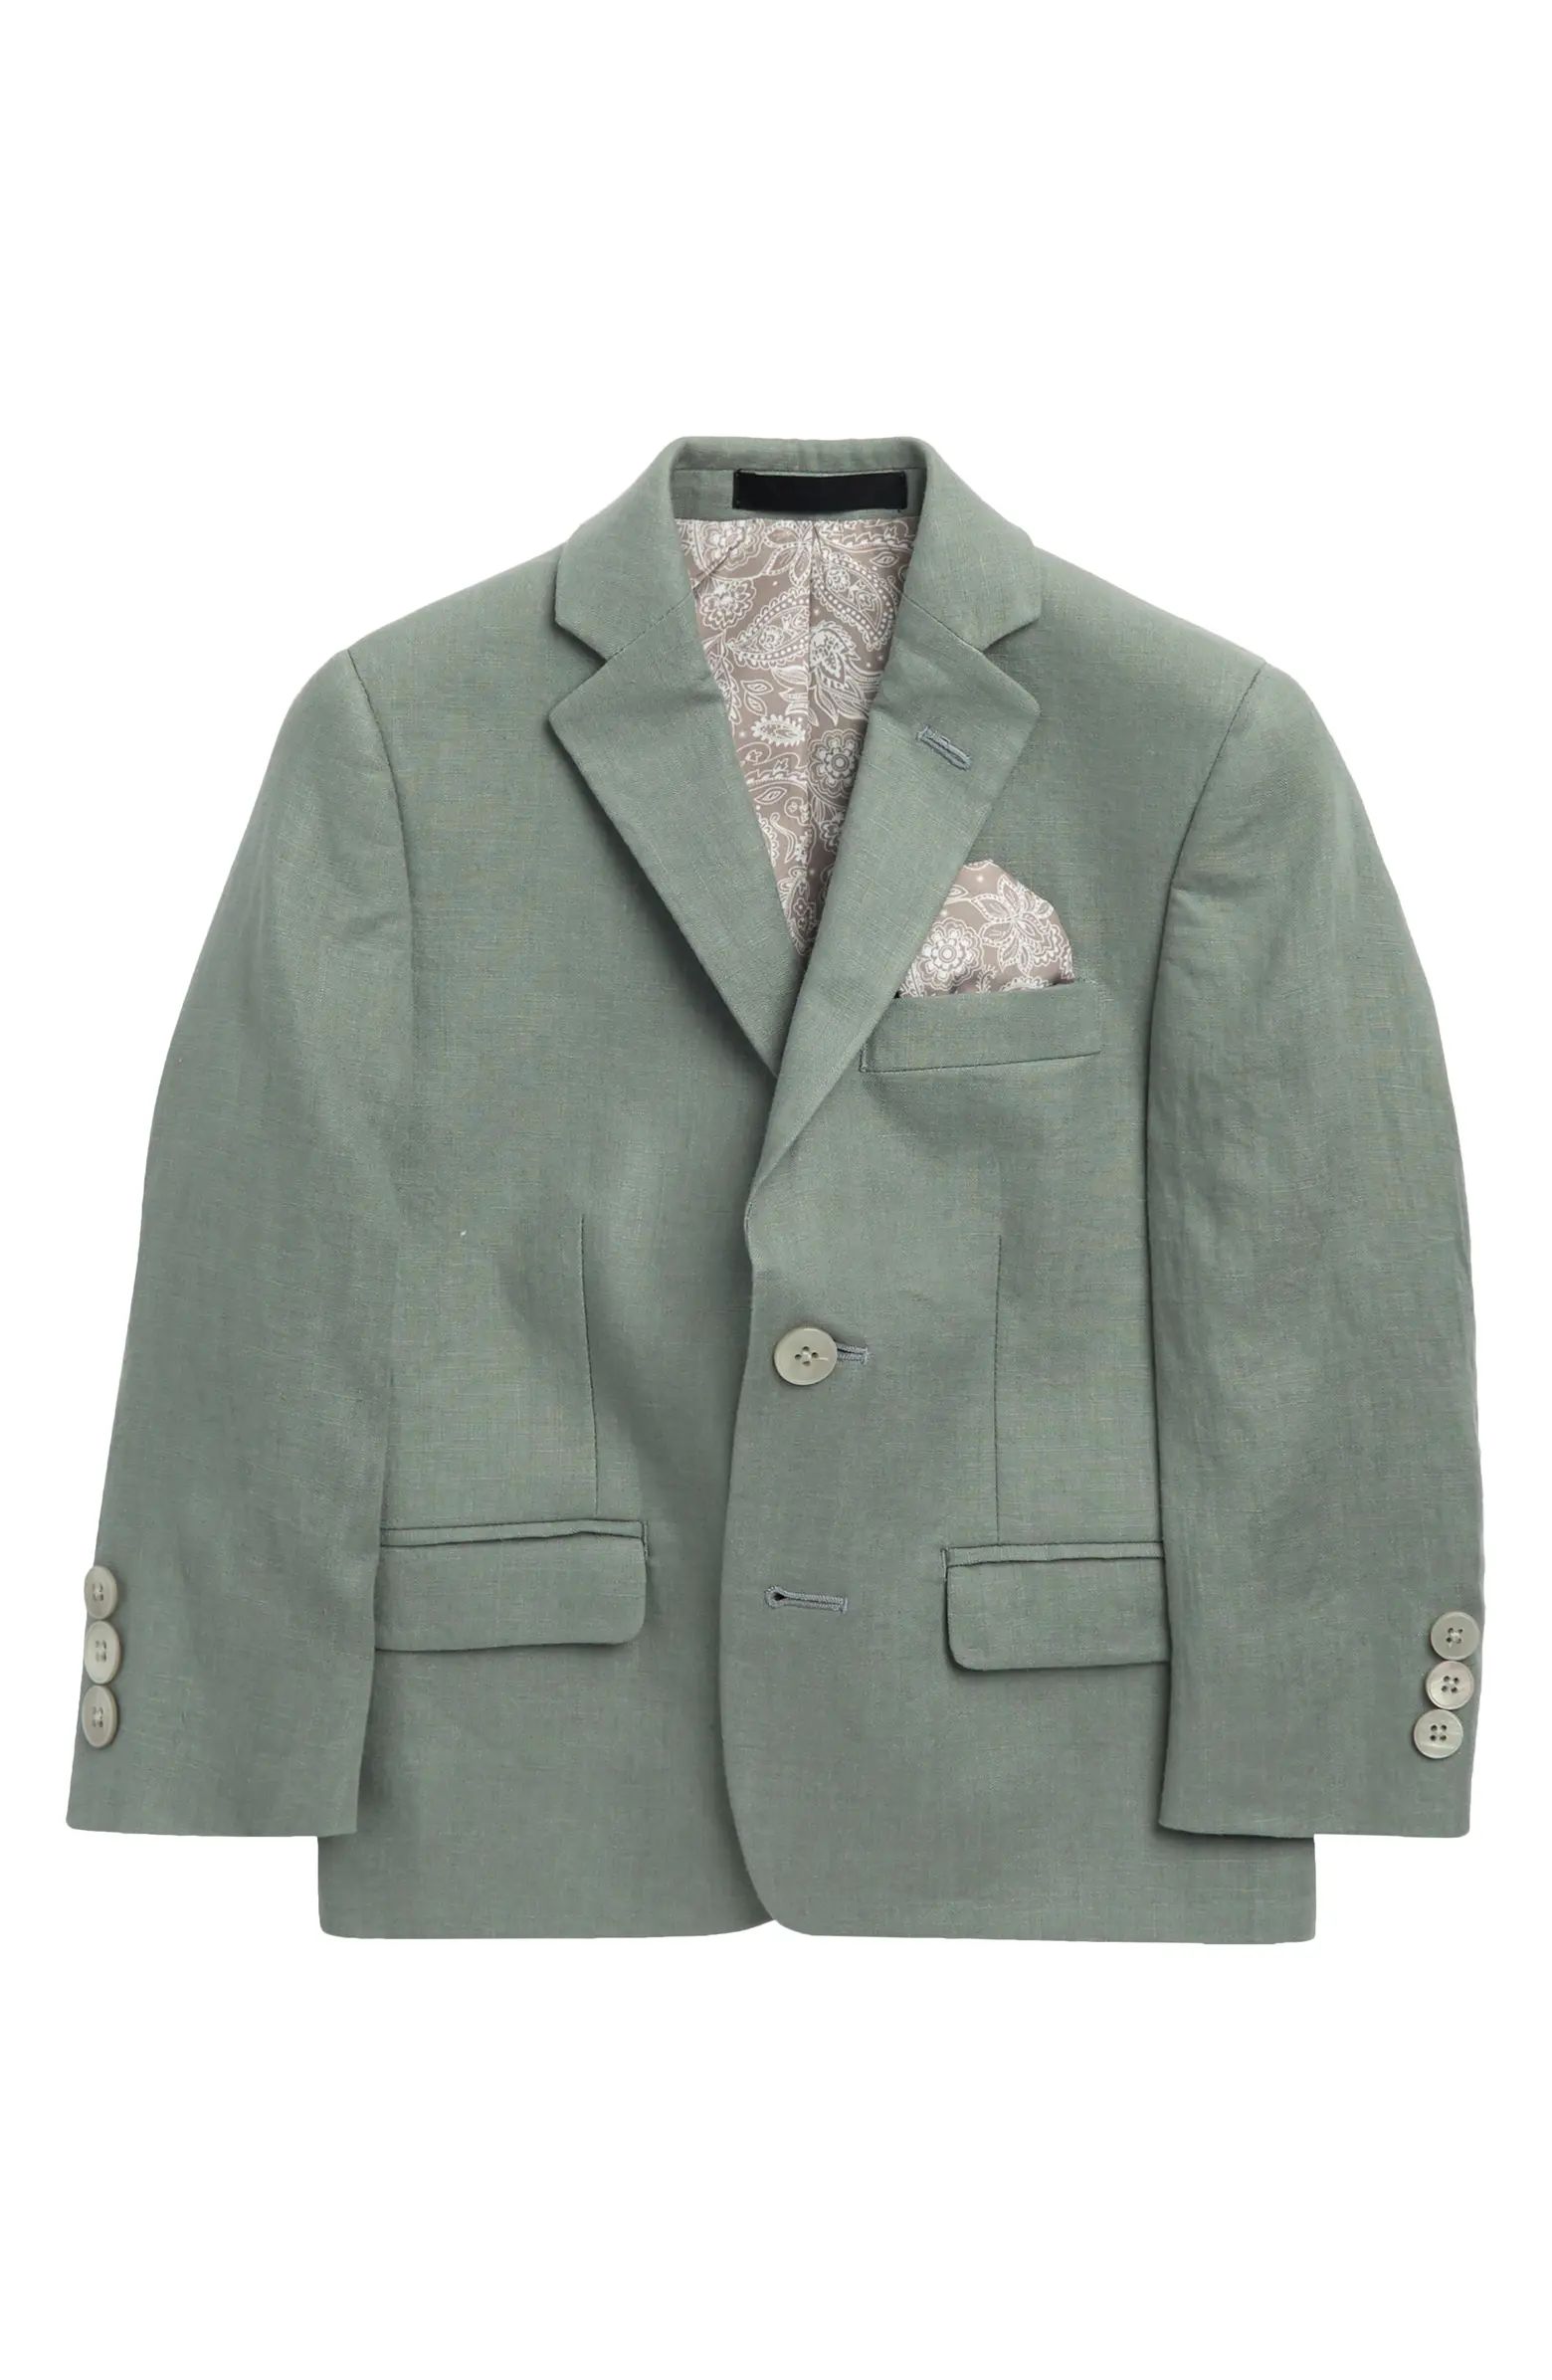 Kids' Two-Button Notch Collar Suit Jacket | Nordstrom Rack